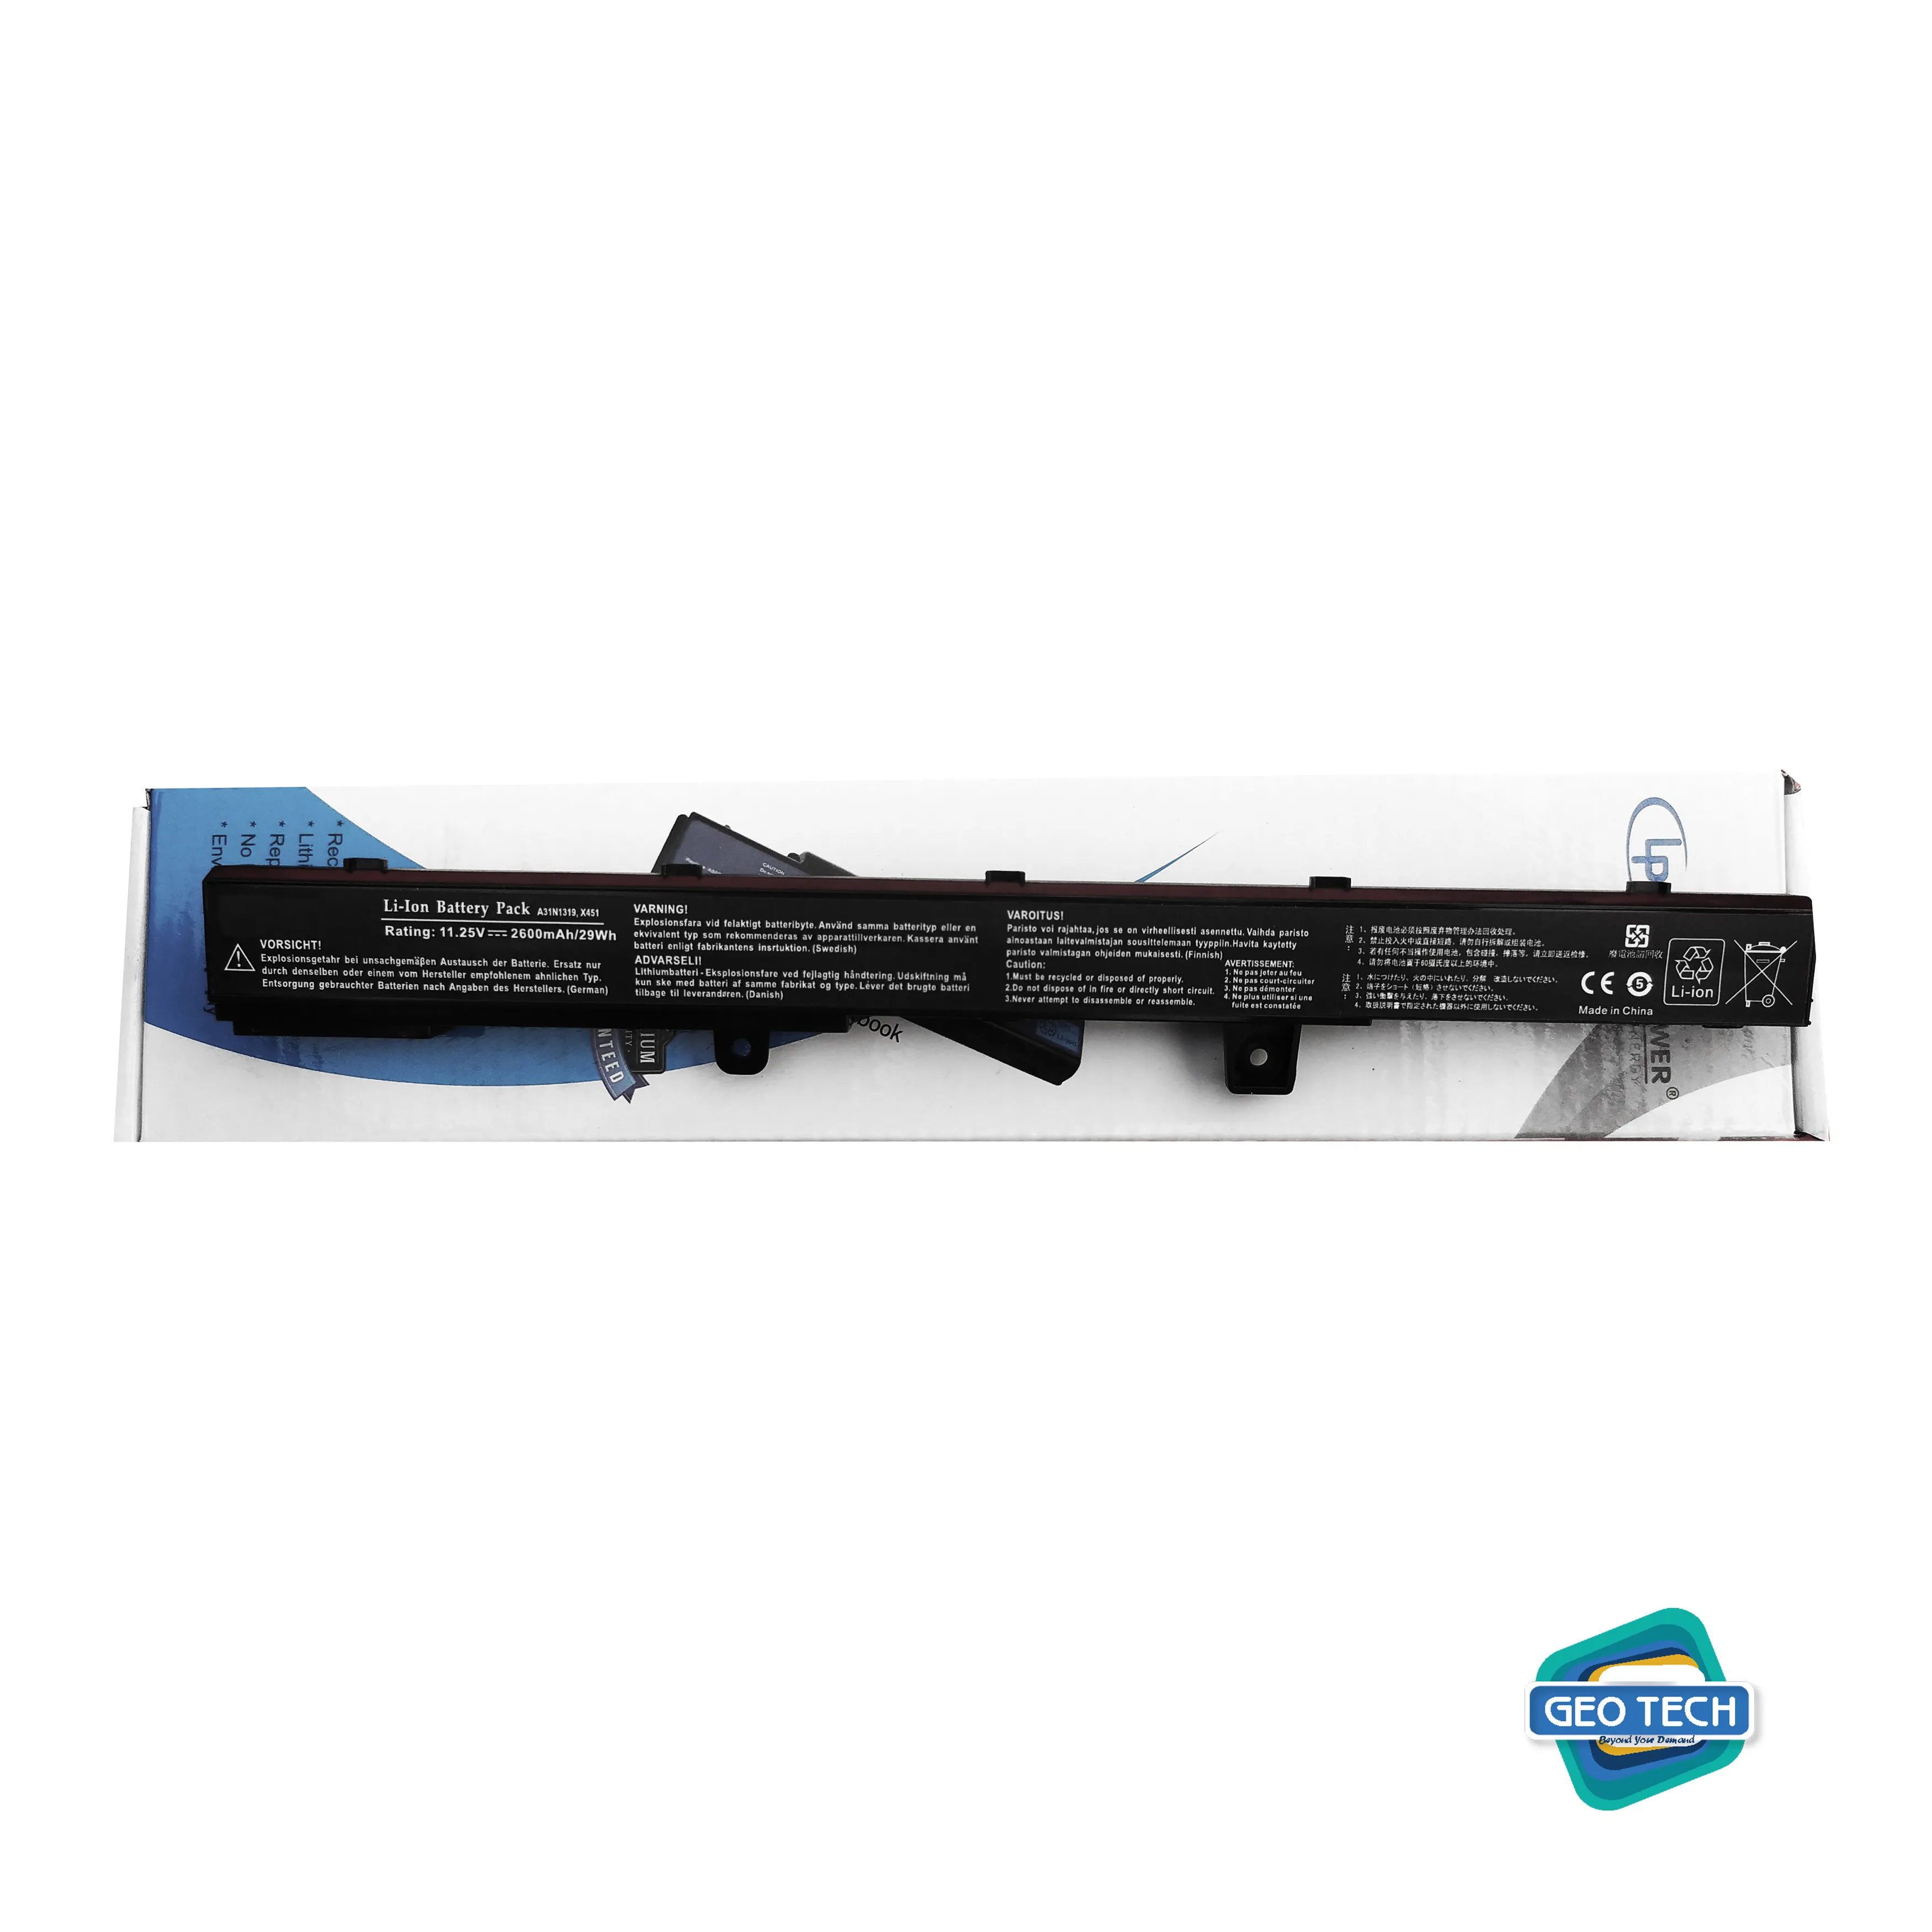 Replacement Battery for Models: Asus X451 X451C X451CA Series Asus X551 X551C X551CA Series Laptop.